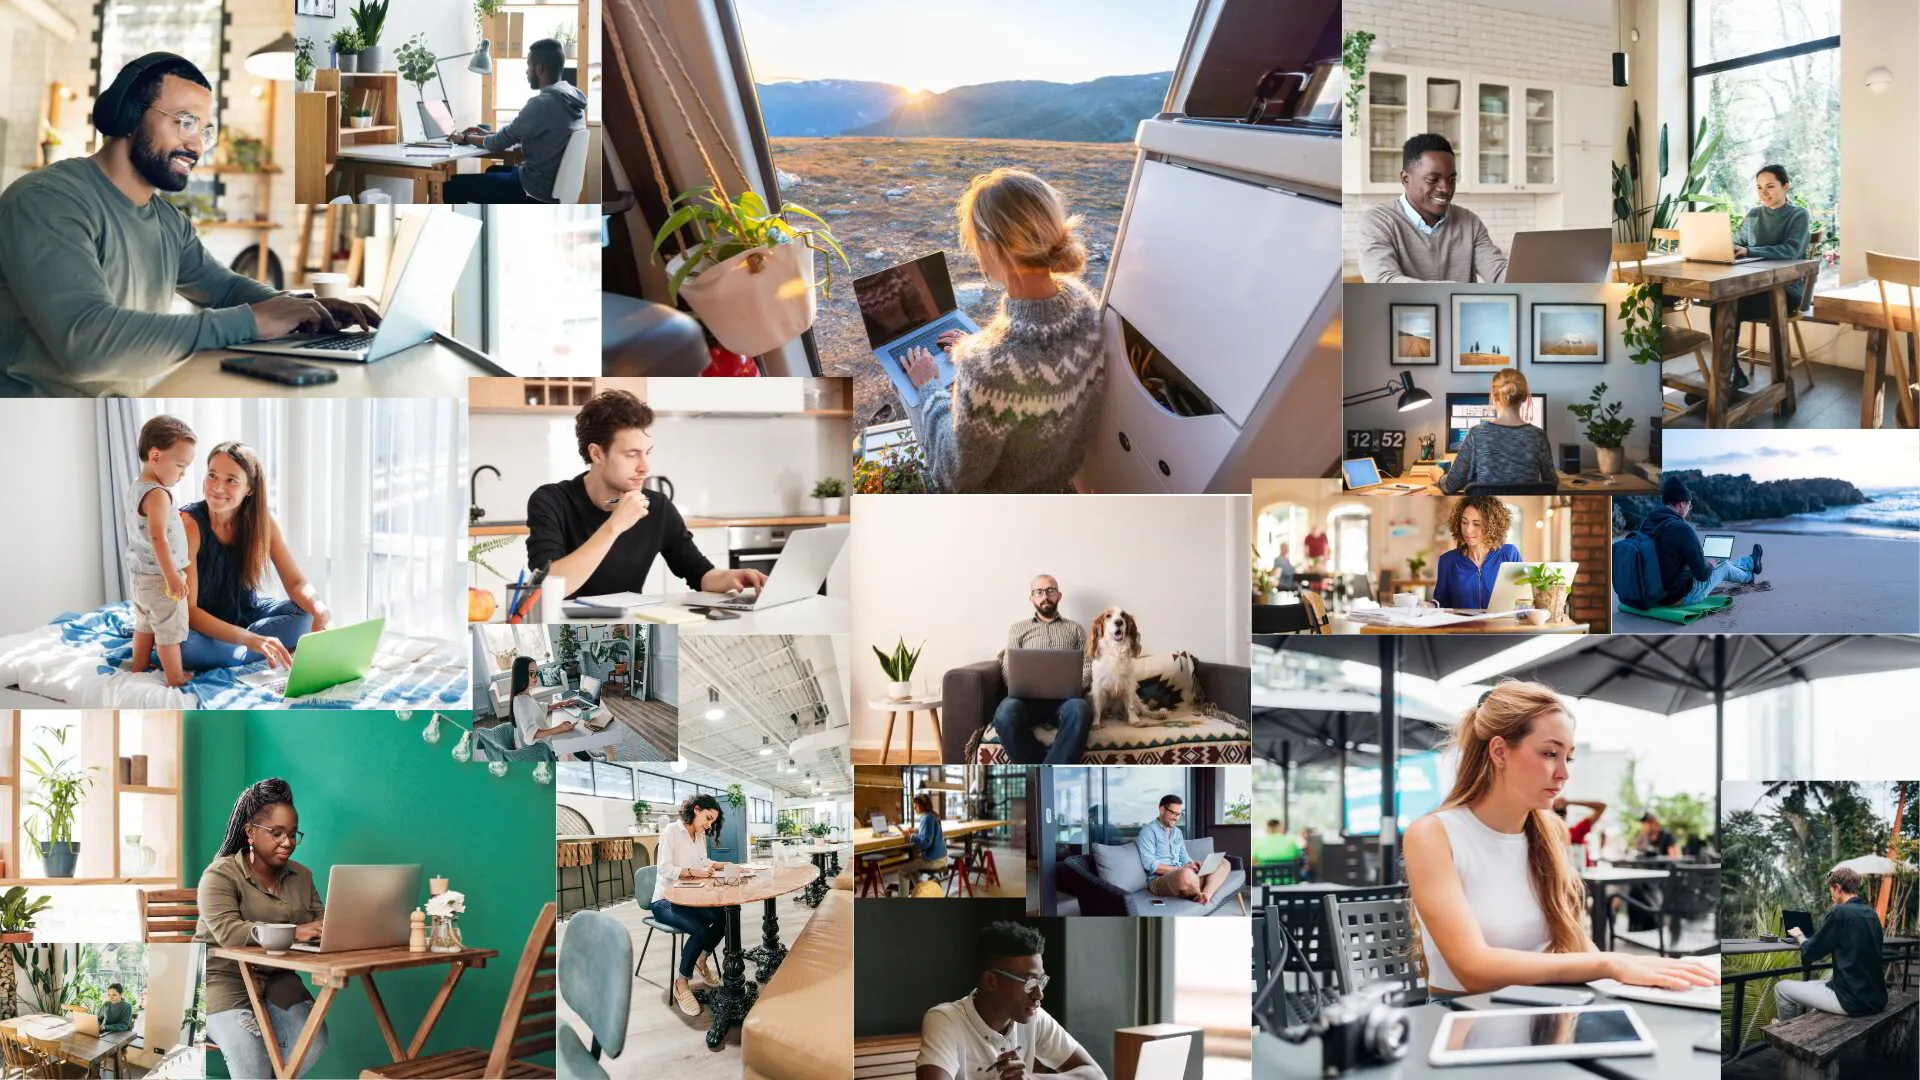 An image showing a variety of people working remotely from home, each focused on their tasks in a home office, coffee shops, beach, and RV setting.